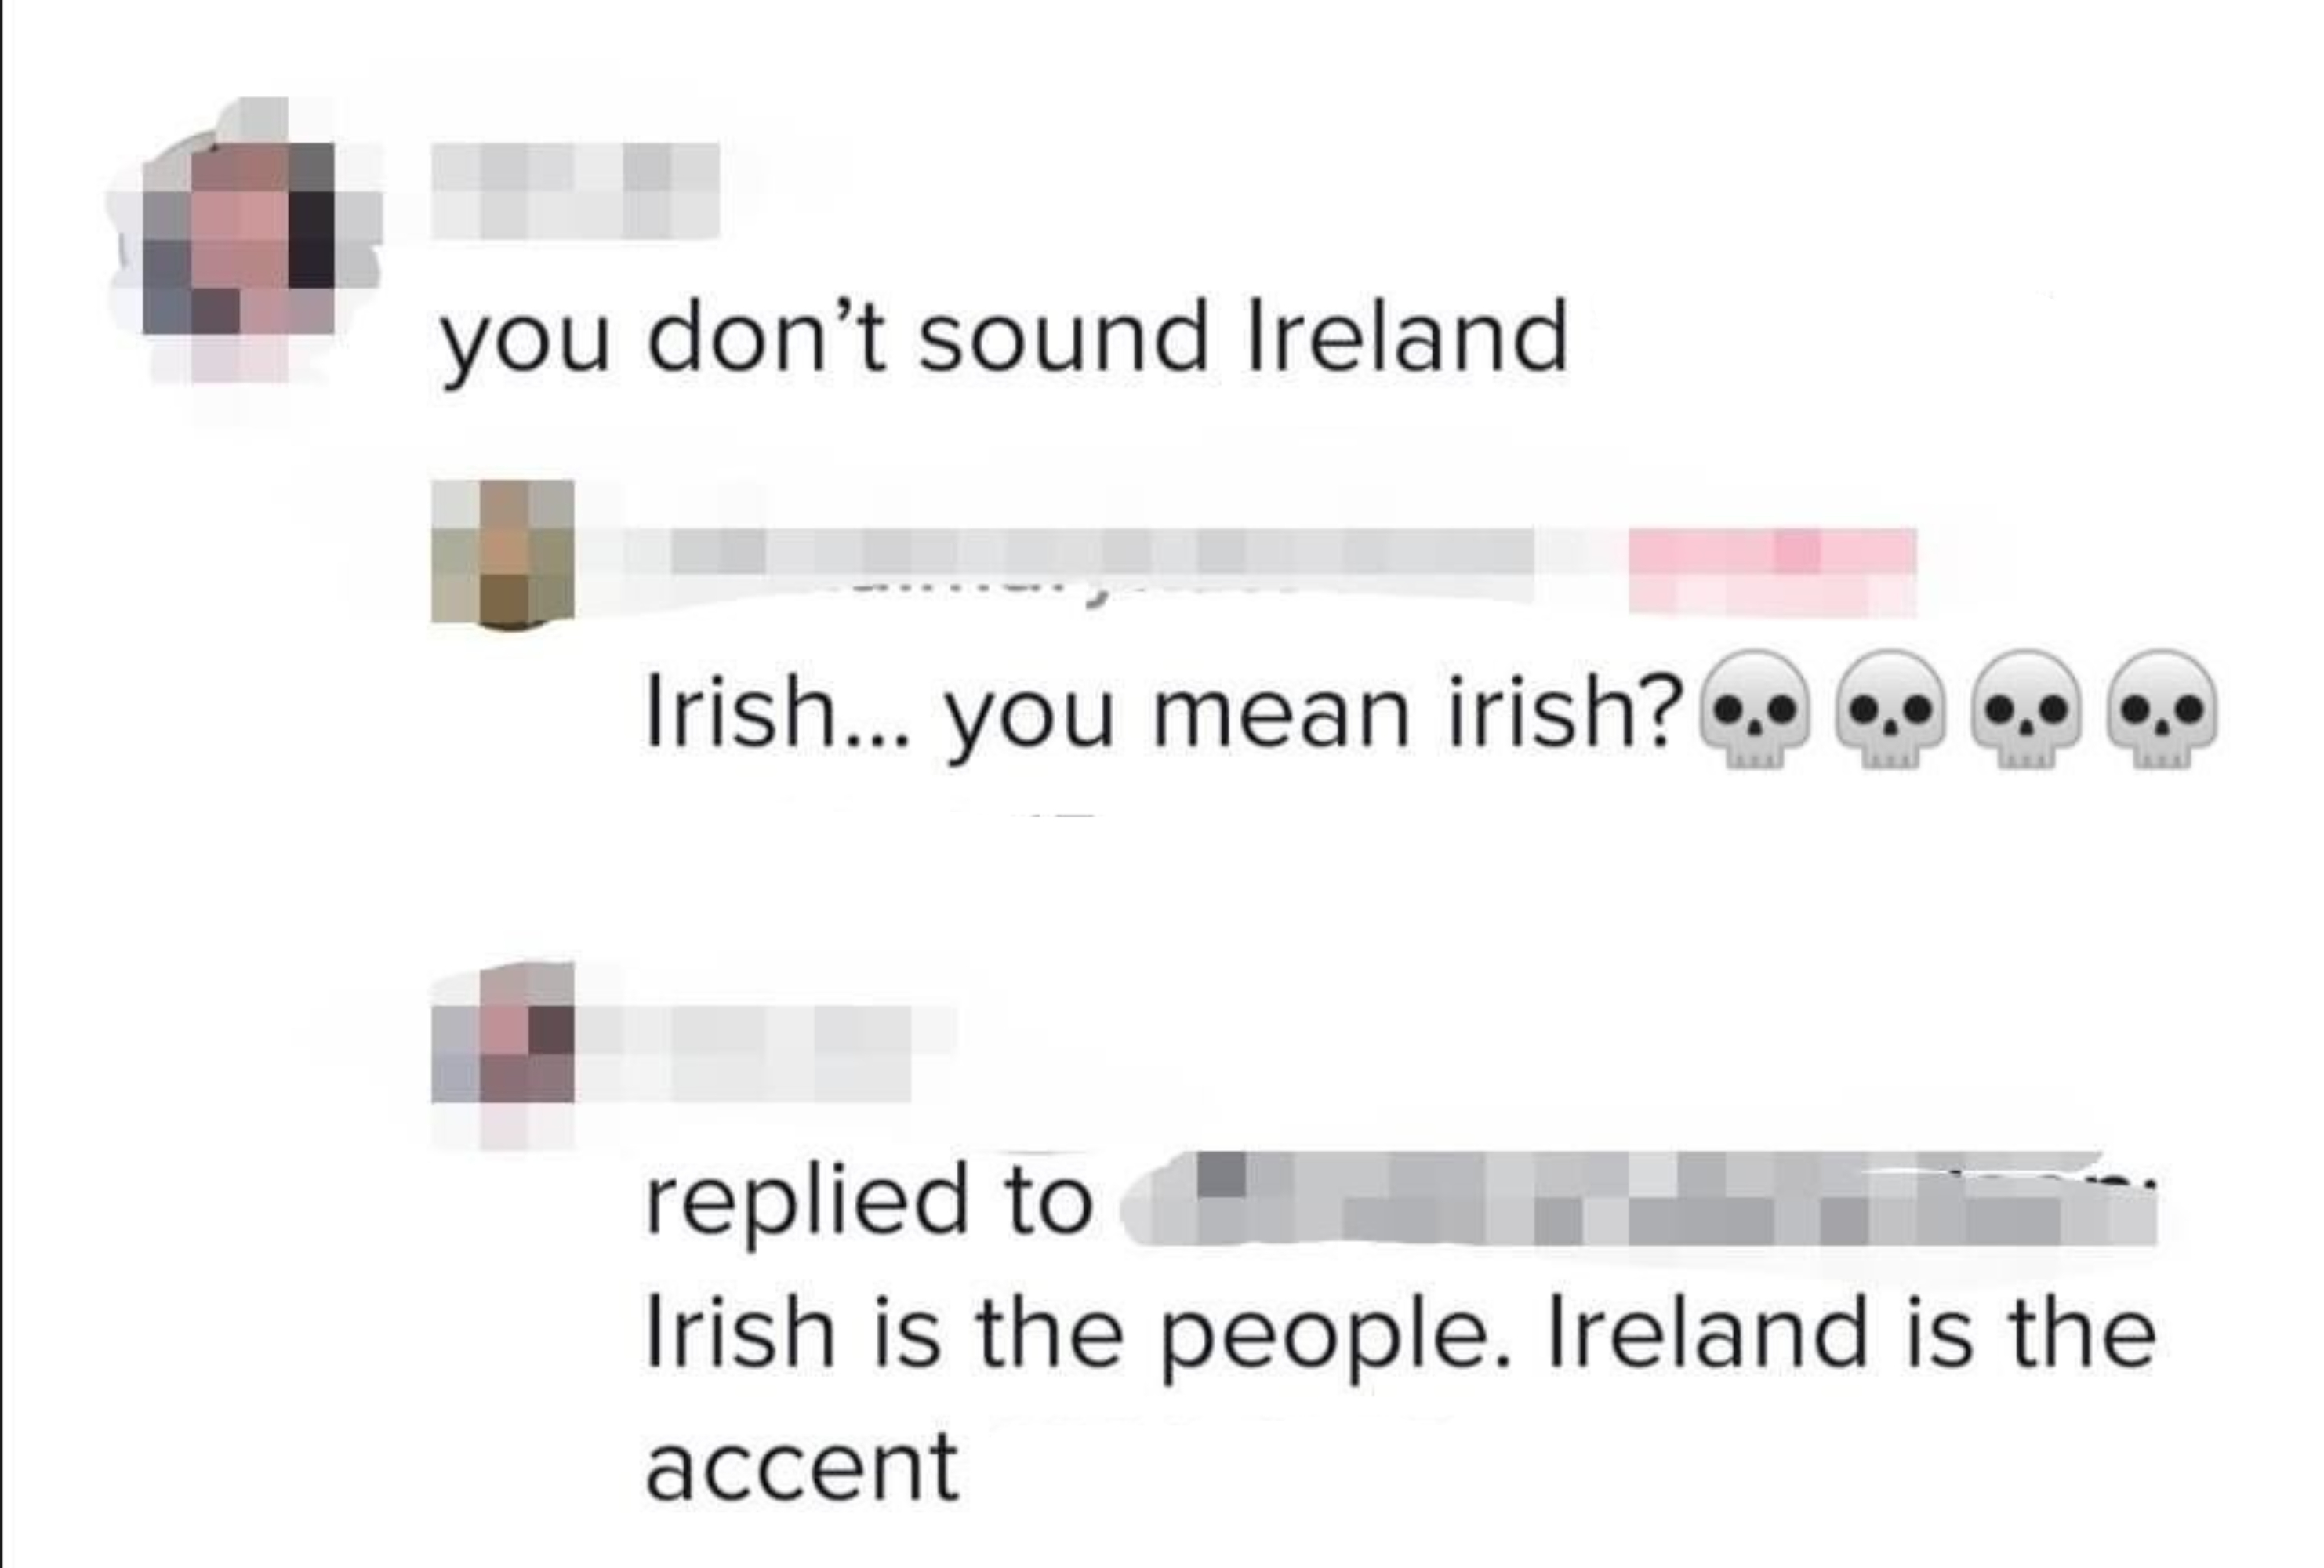 facebook conversation where someone says irish is the people of ireland and ireland is the accent